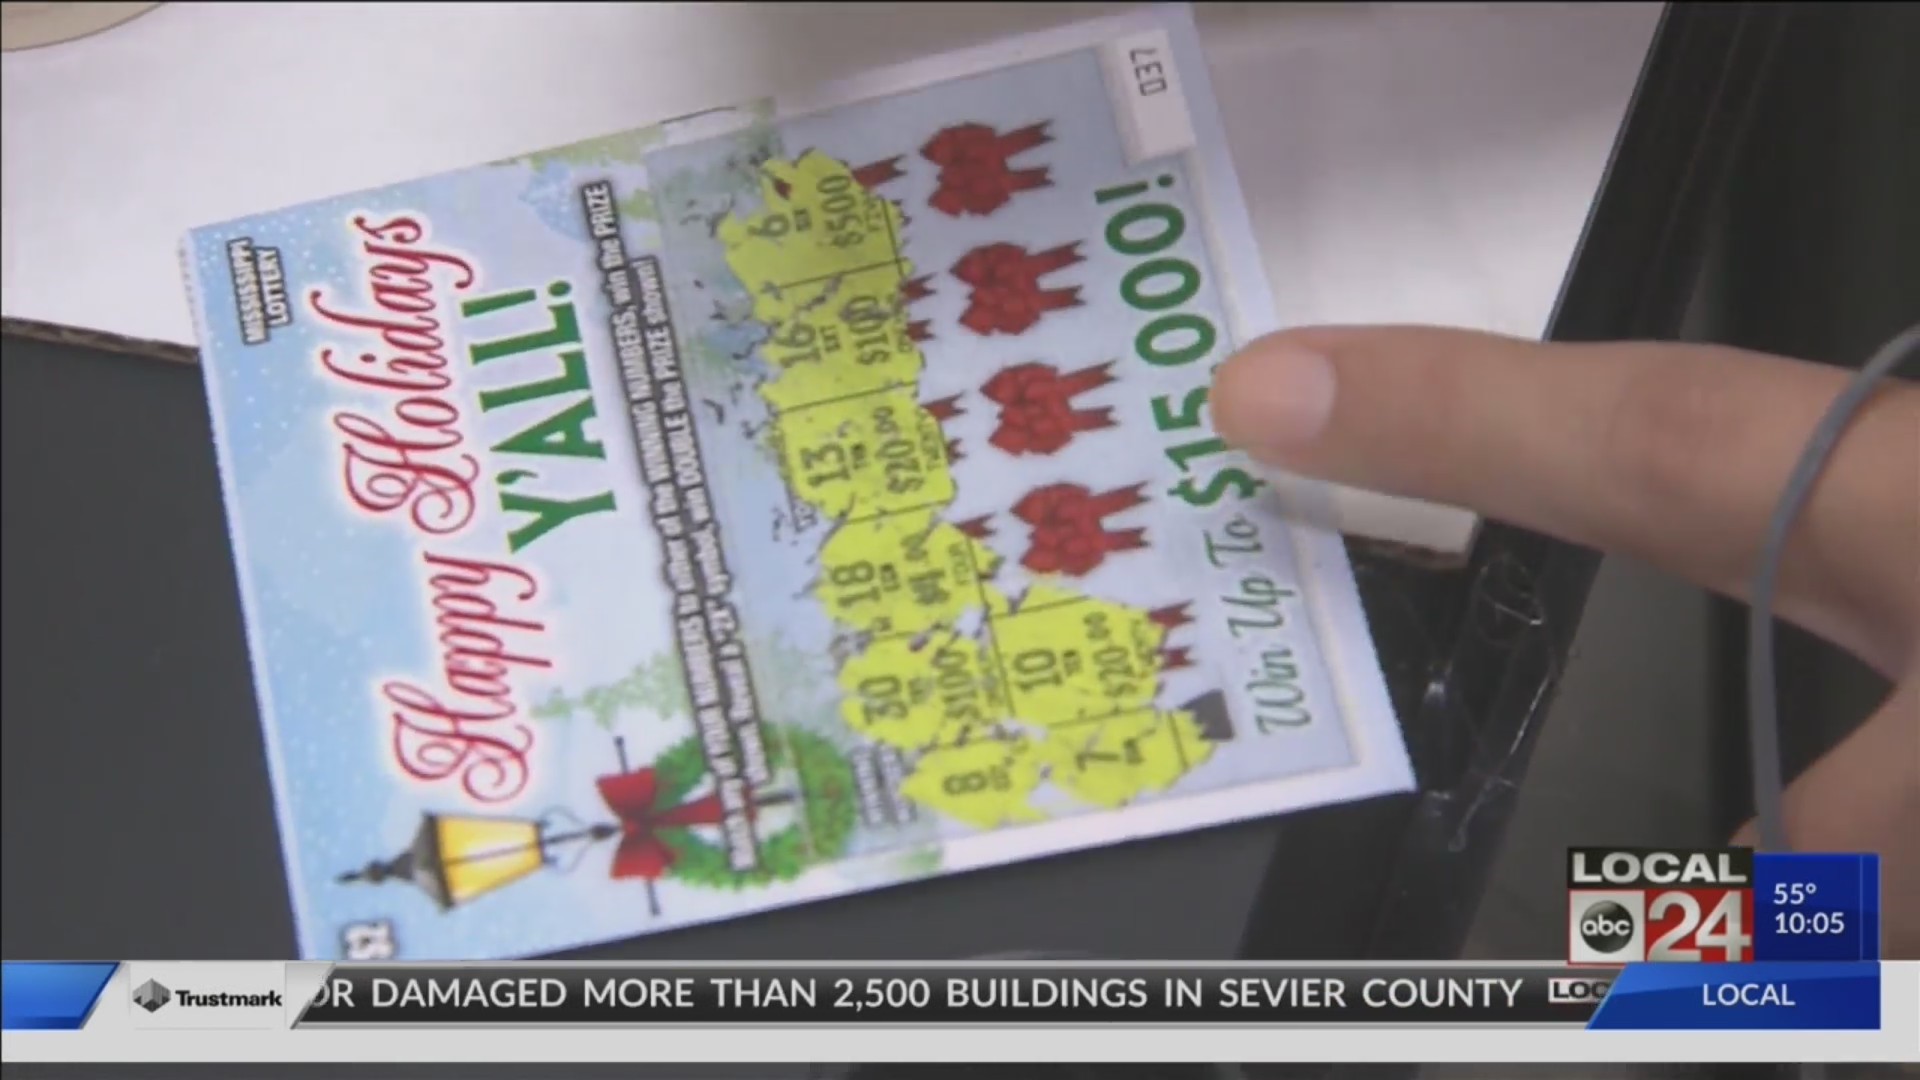 Mississippi lottery payment with credit cards may cause financial issues for families struggling with debt